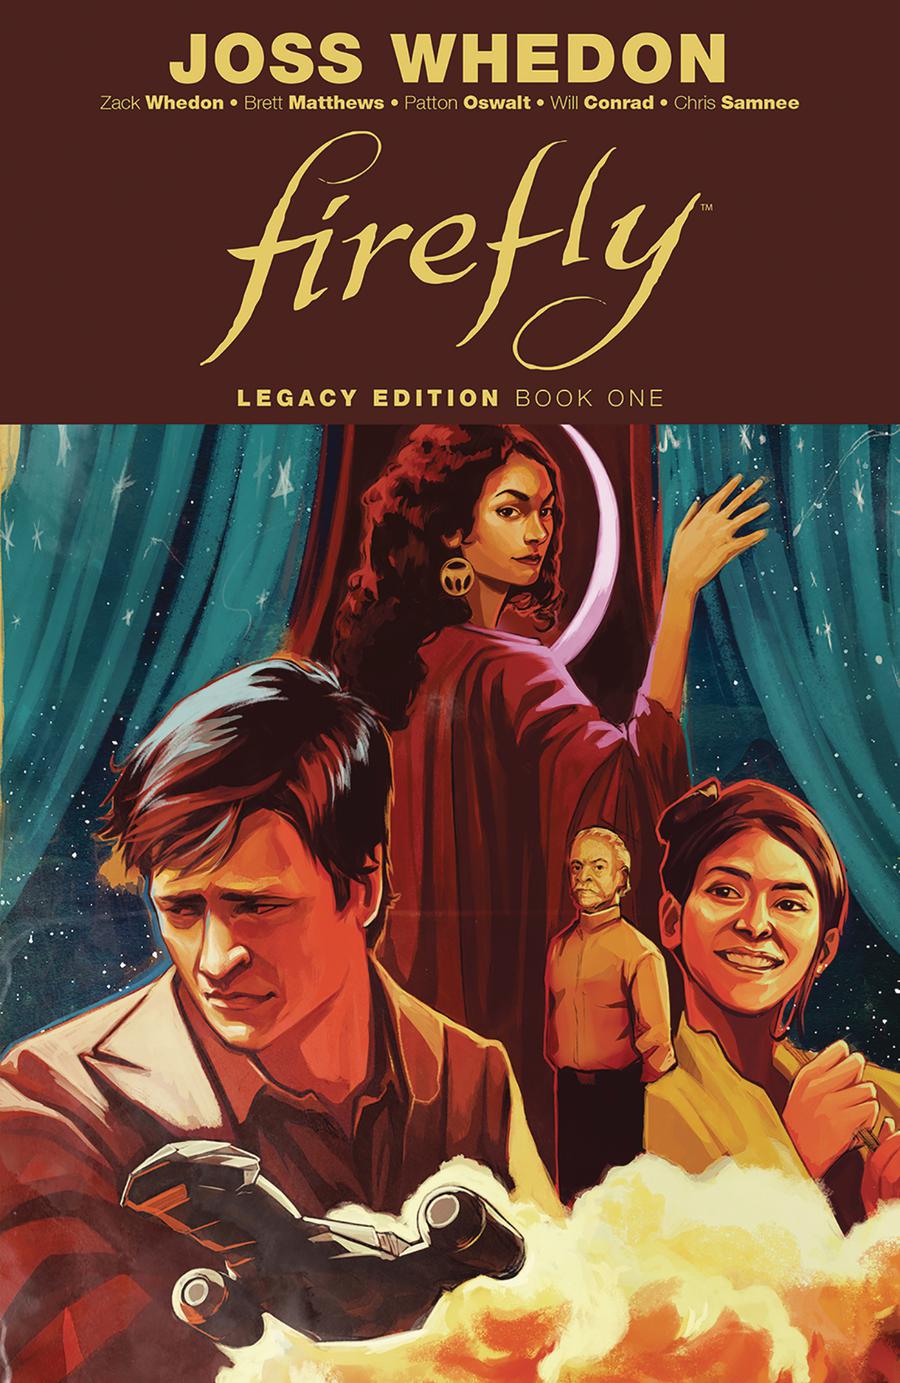 Firefly Legacy Edition Vol 1 TP